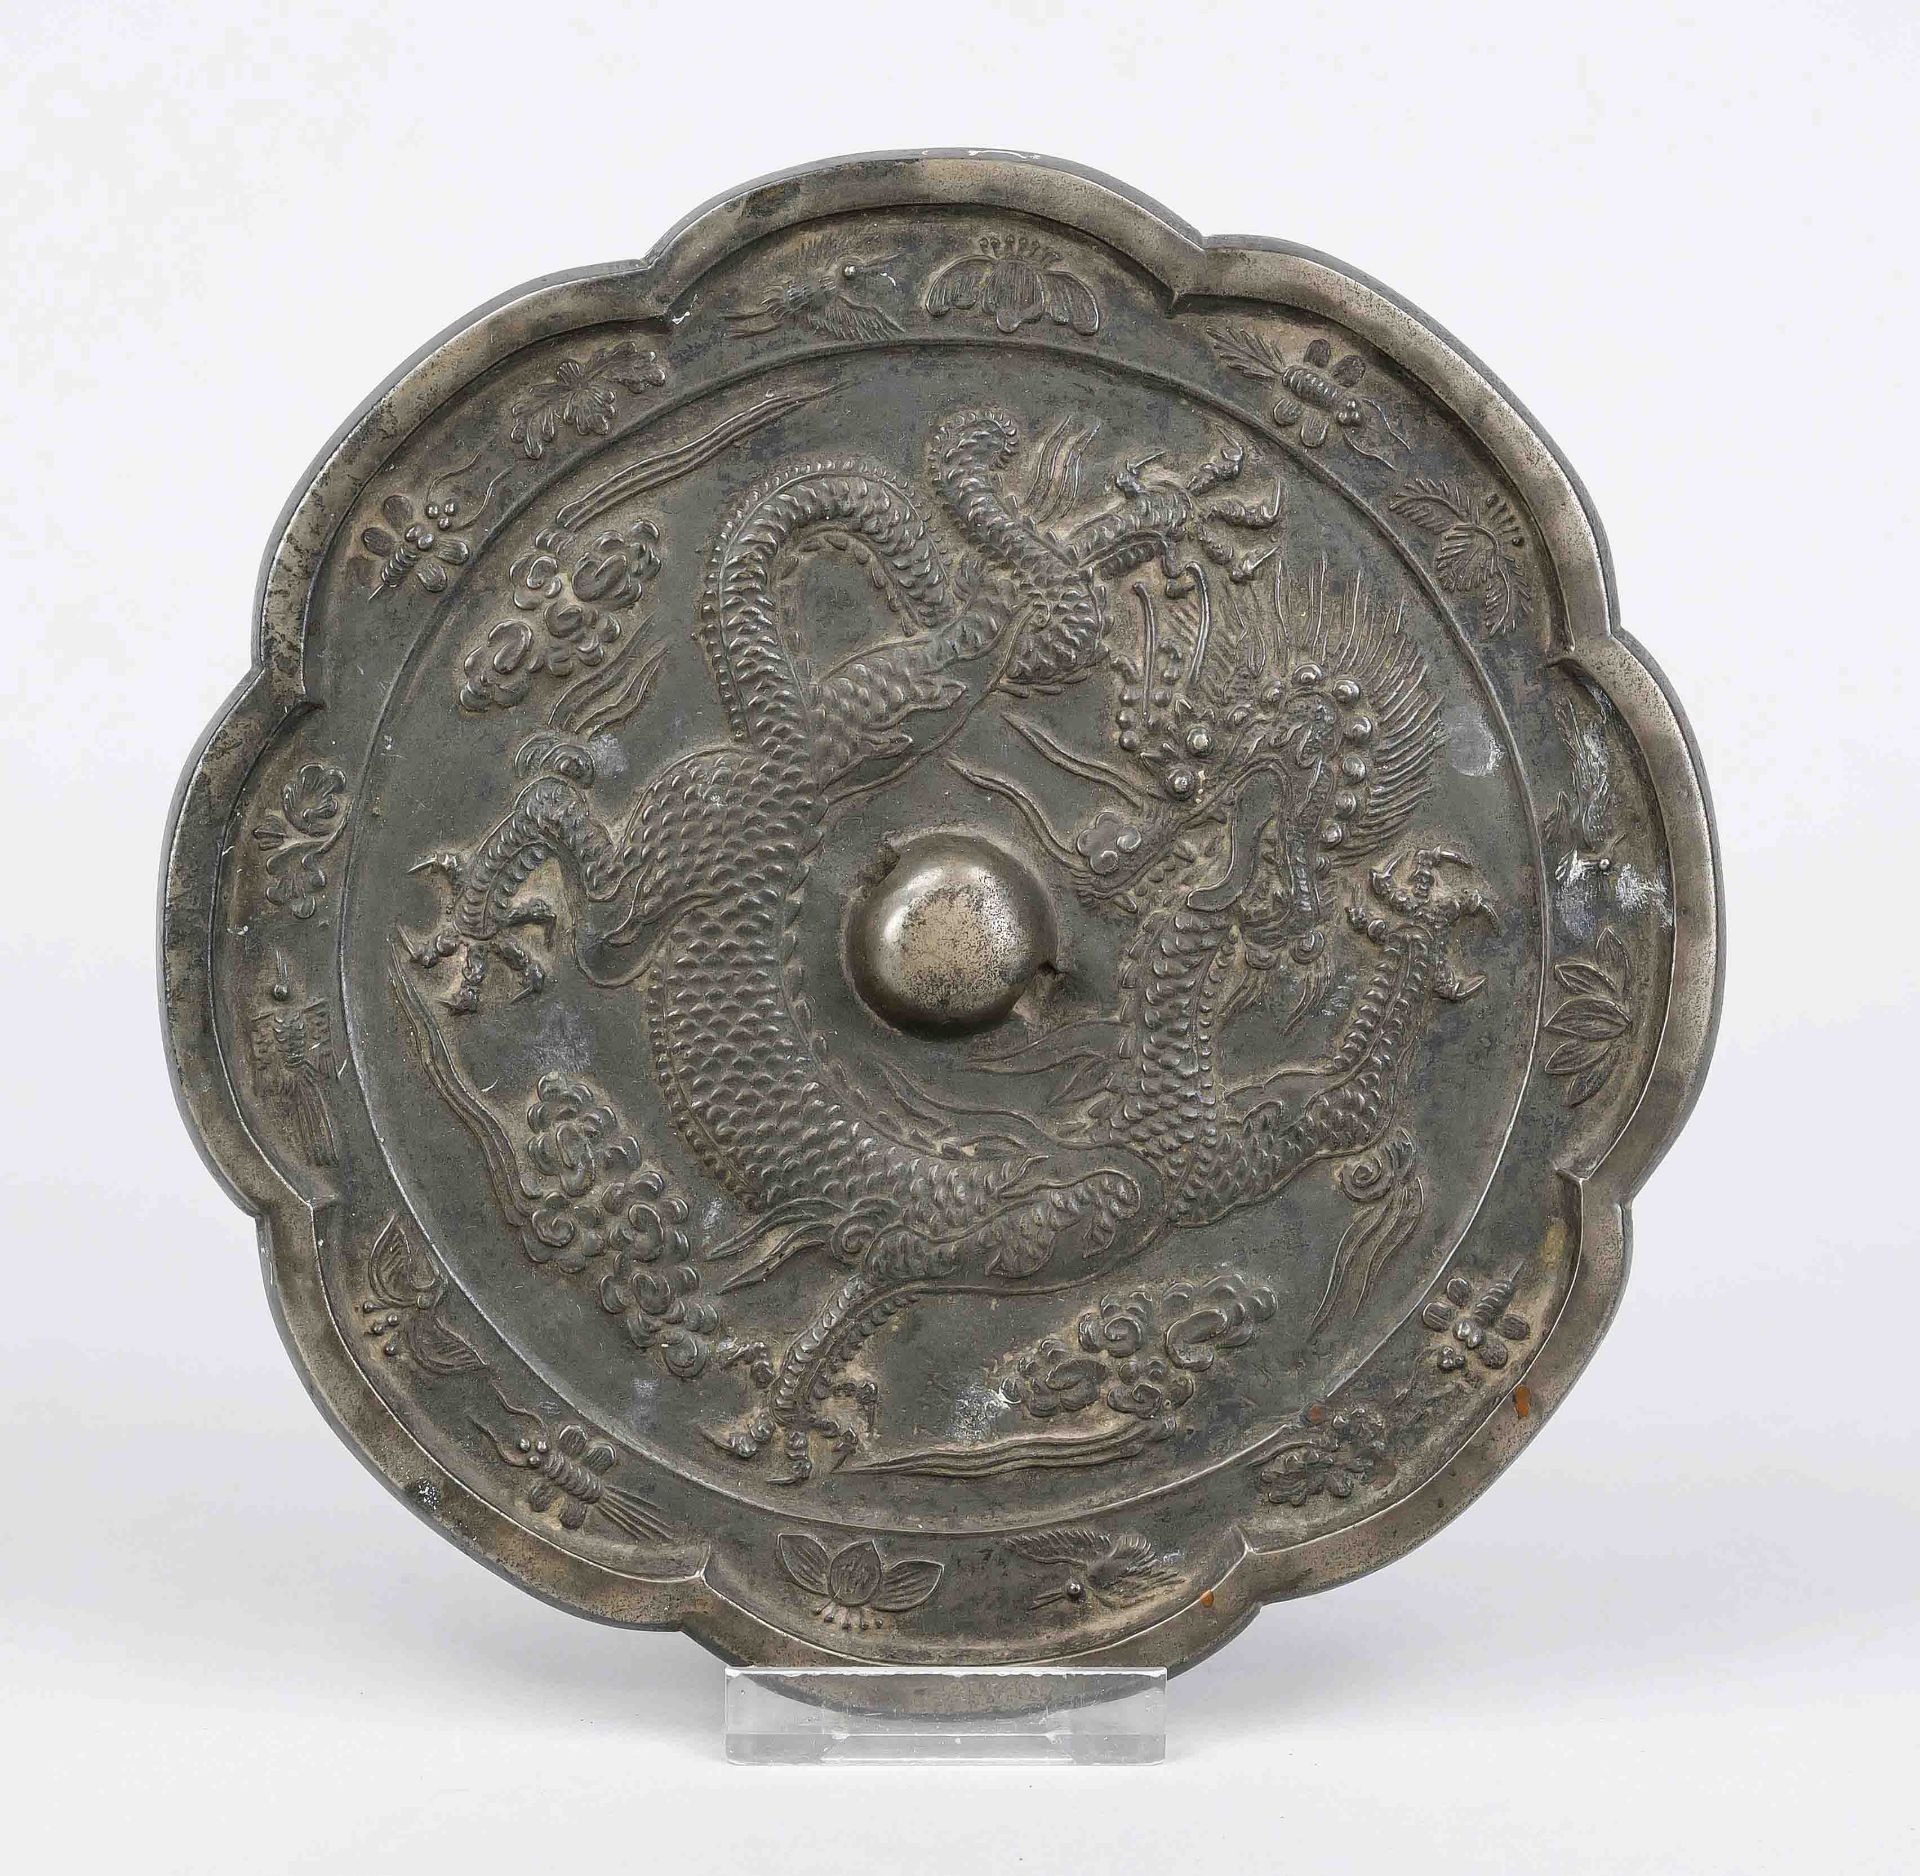 Bronze mirror, China, exact age uncertain. Eight-pass curved, relief decoration with a writhing